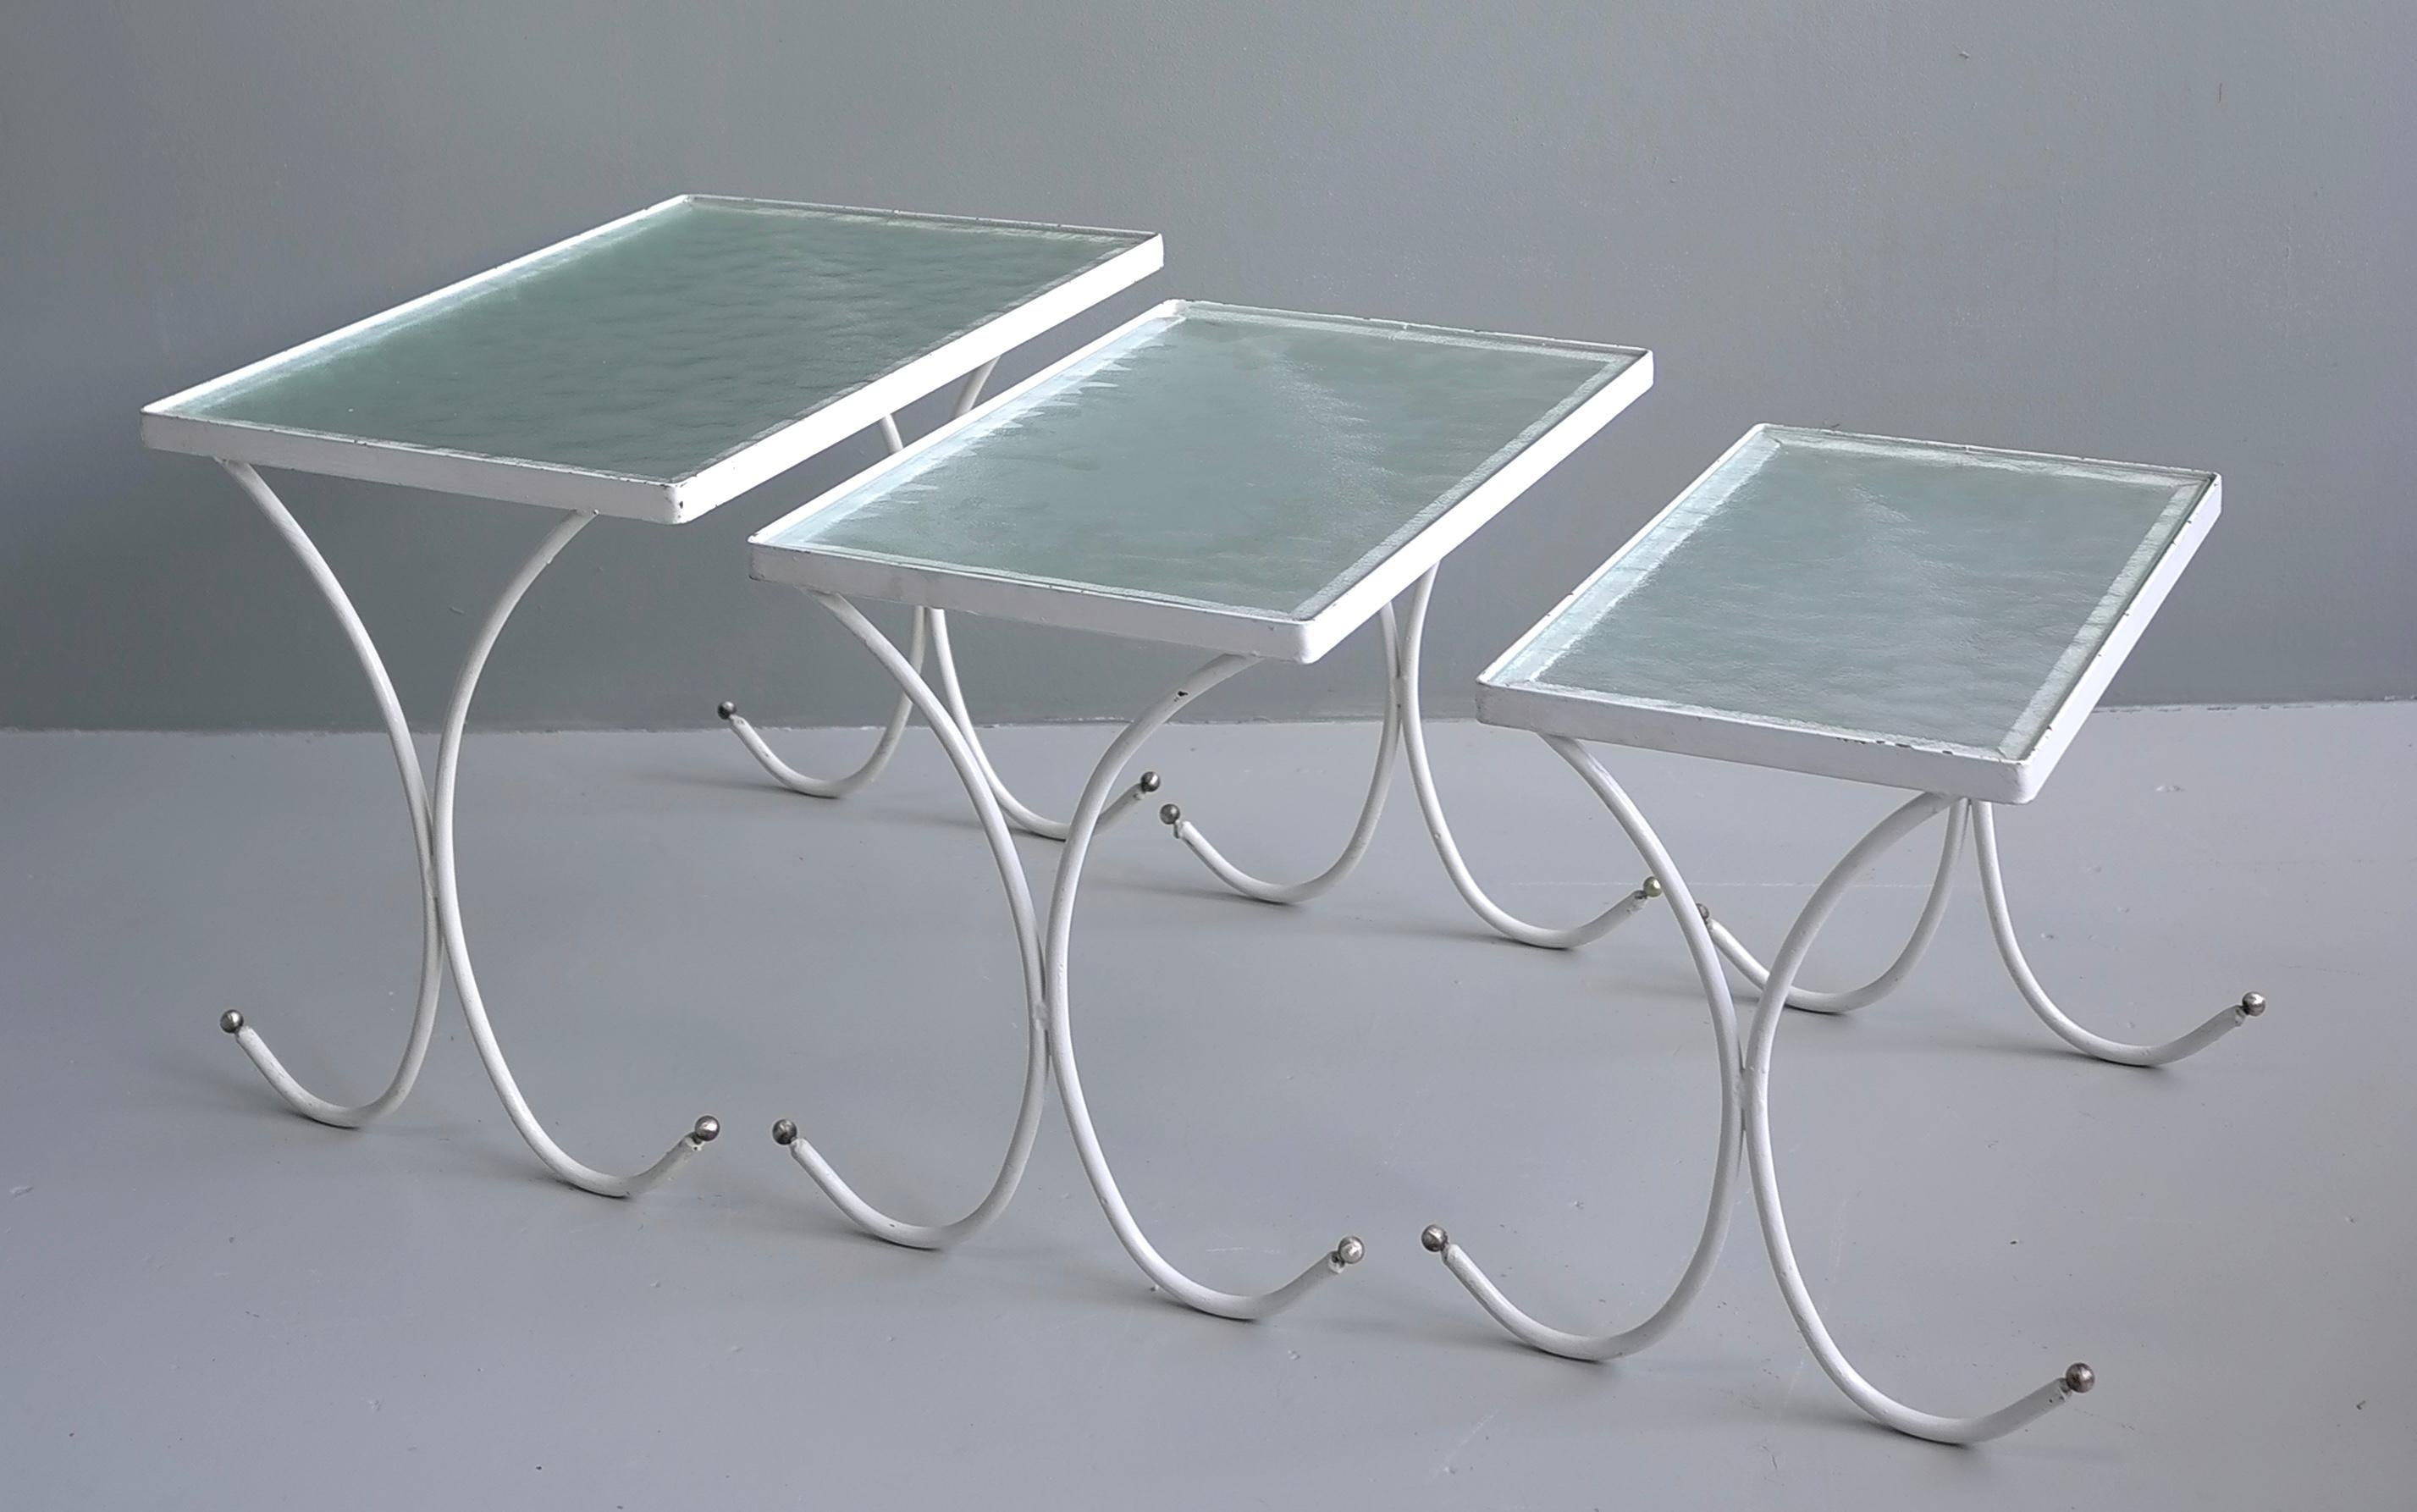 Set of Three White metal Nesting Tables, France 1950's

The tables have metal frames with brass ball ends and glass tops.